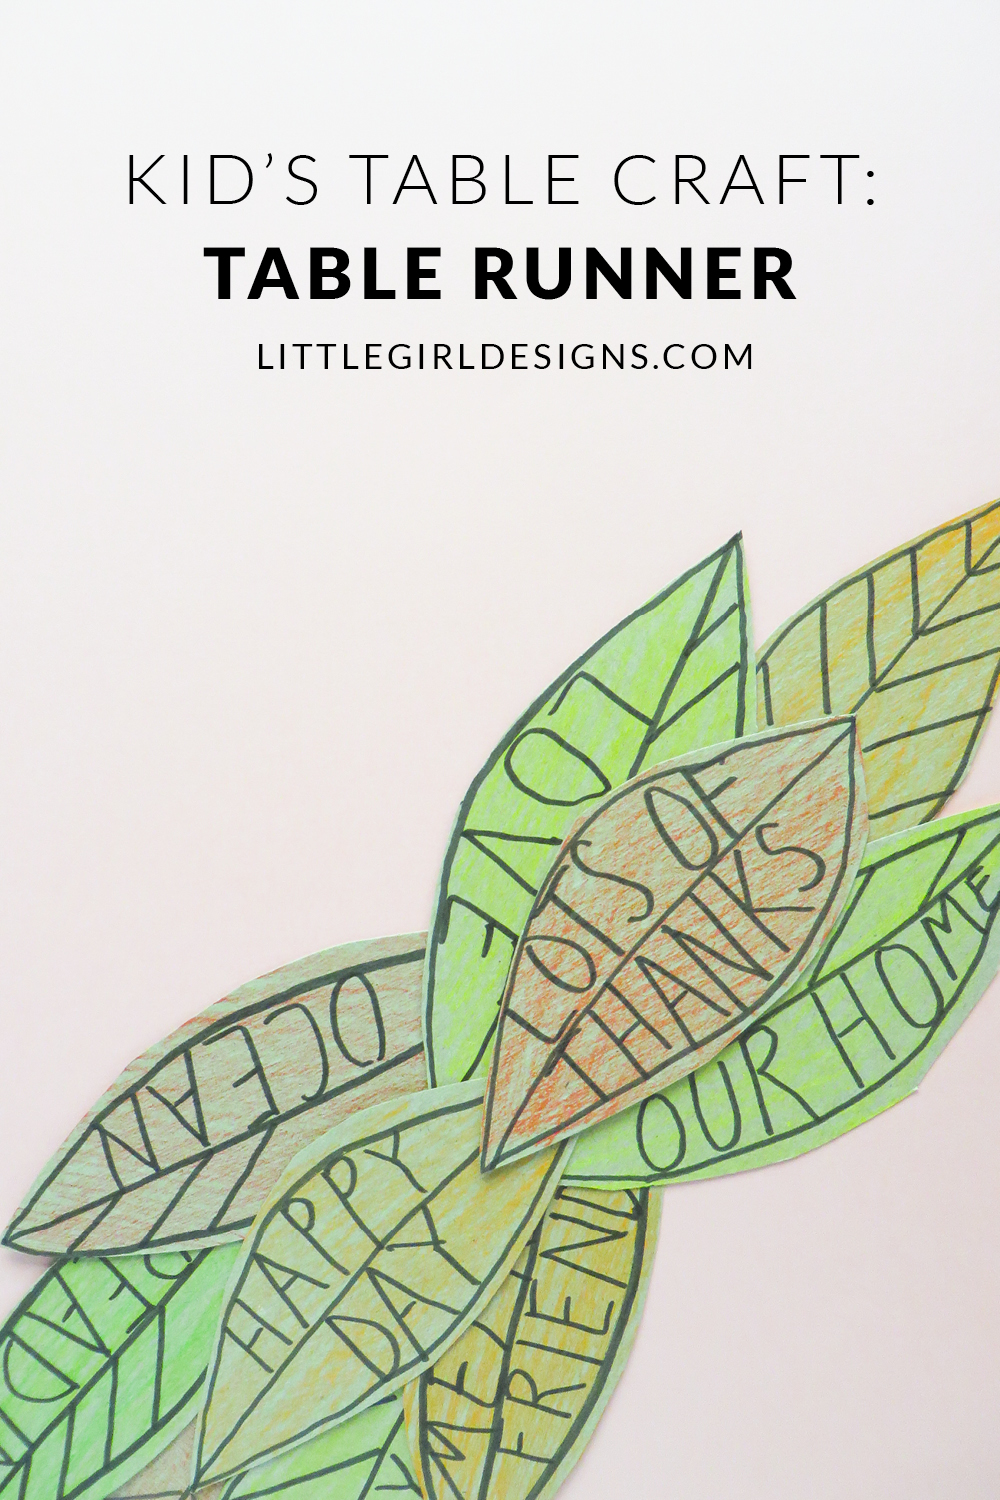 Kid’s Table Craft: Table Runner